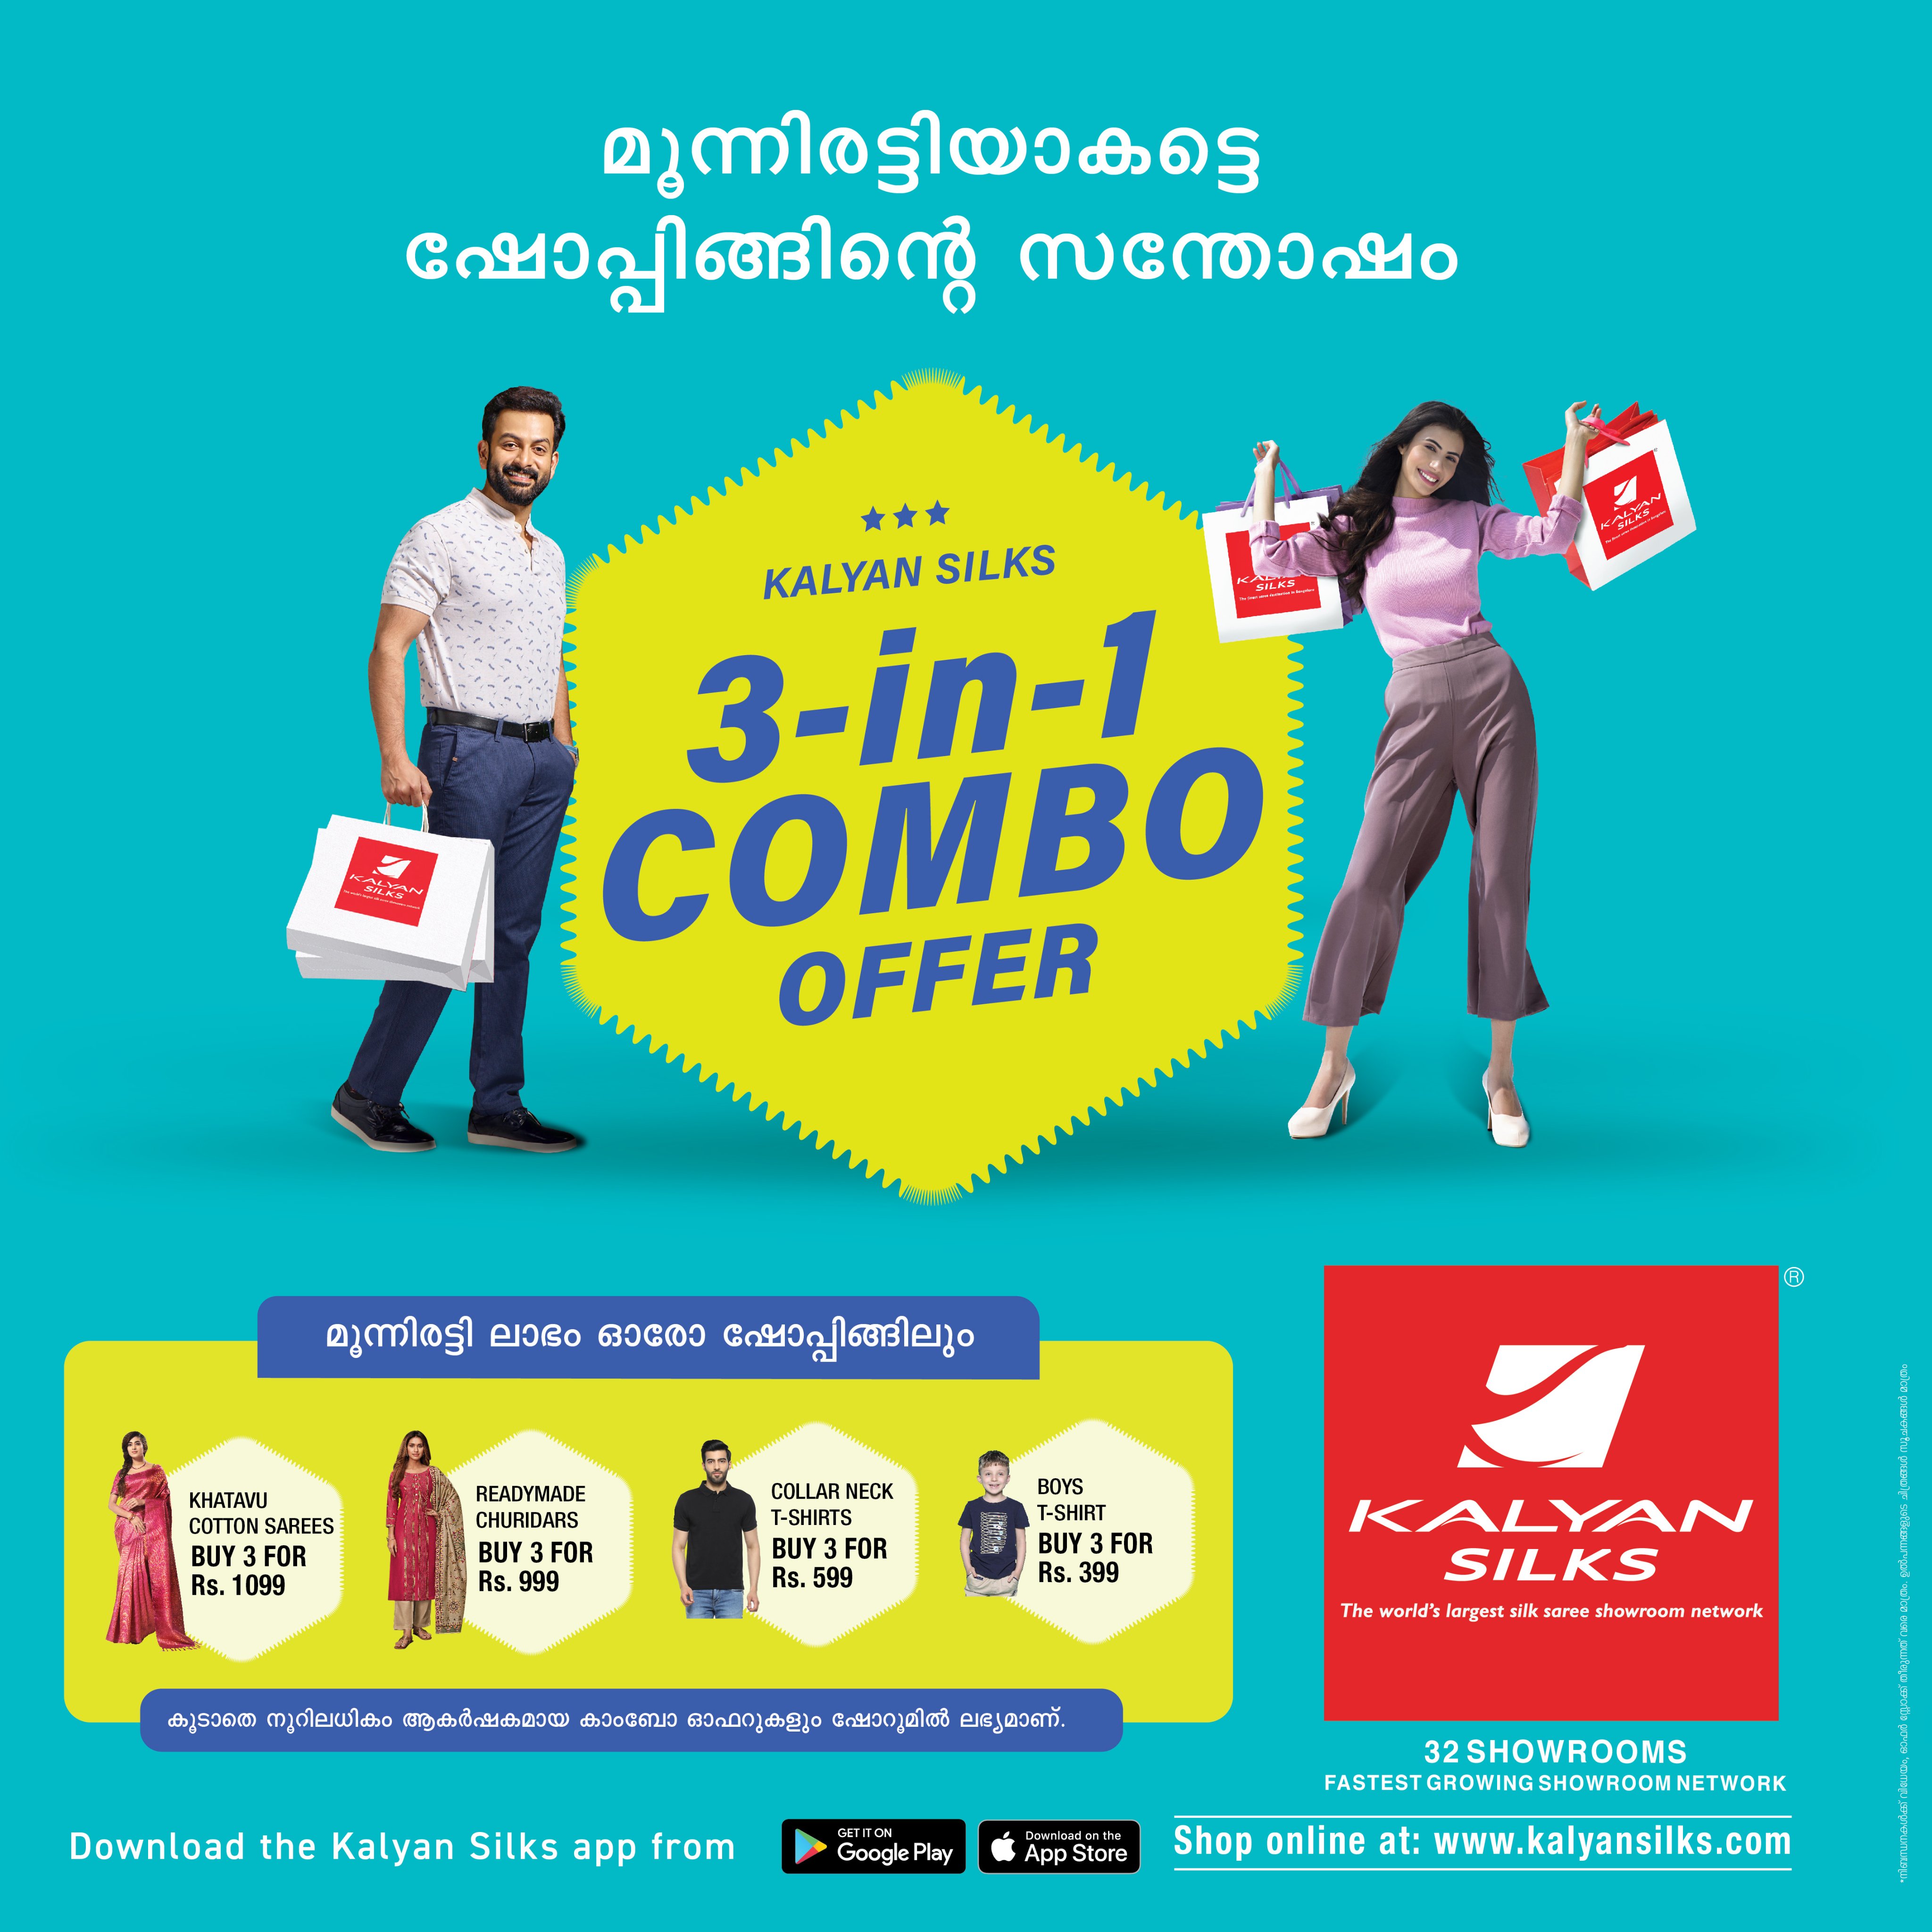 Kalyan Silks on X: Kalyan Silks 3 in 1 Combo Offer. Save 3 times more on  every shopping. Surprise combo in sarees, magic combo in ladies' wear,  master combos in men's wear